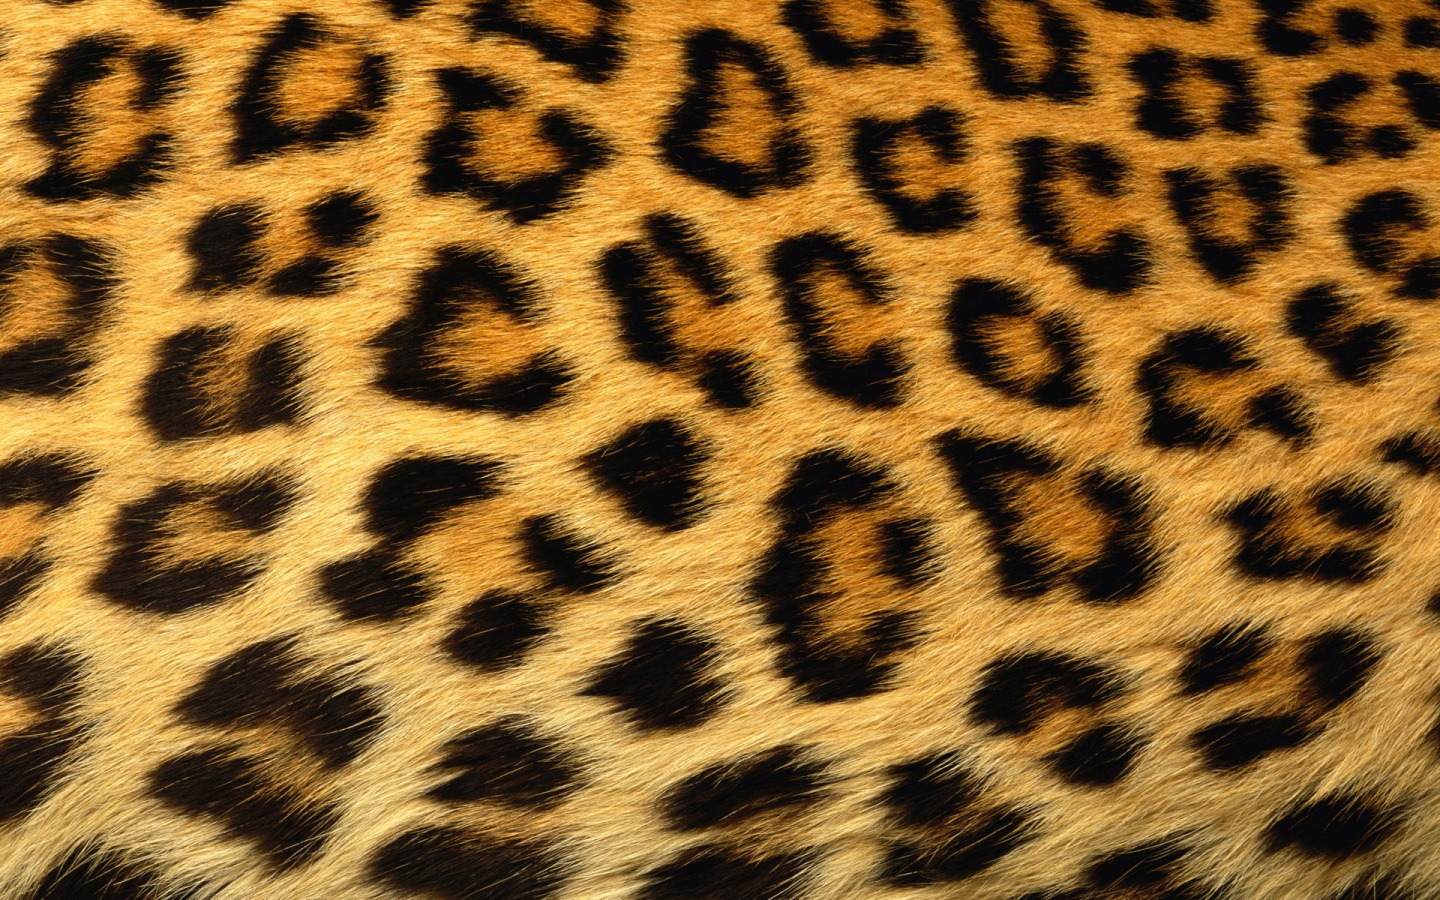 Leopard Print Background X Free Images at Clkercom   vector clip